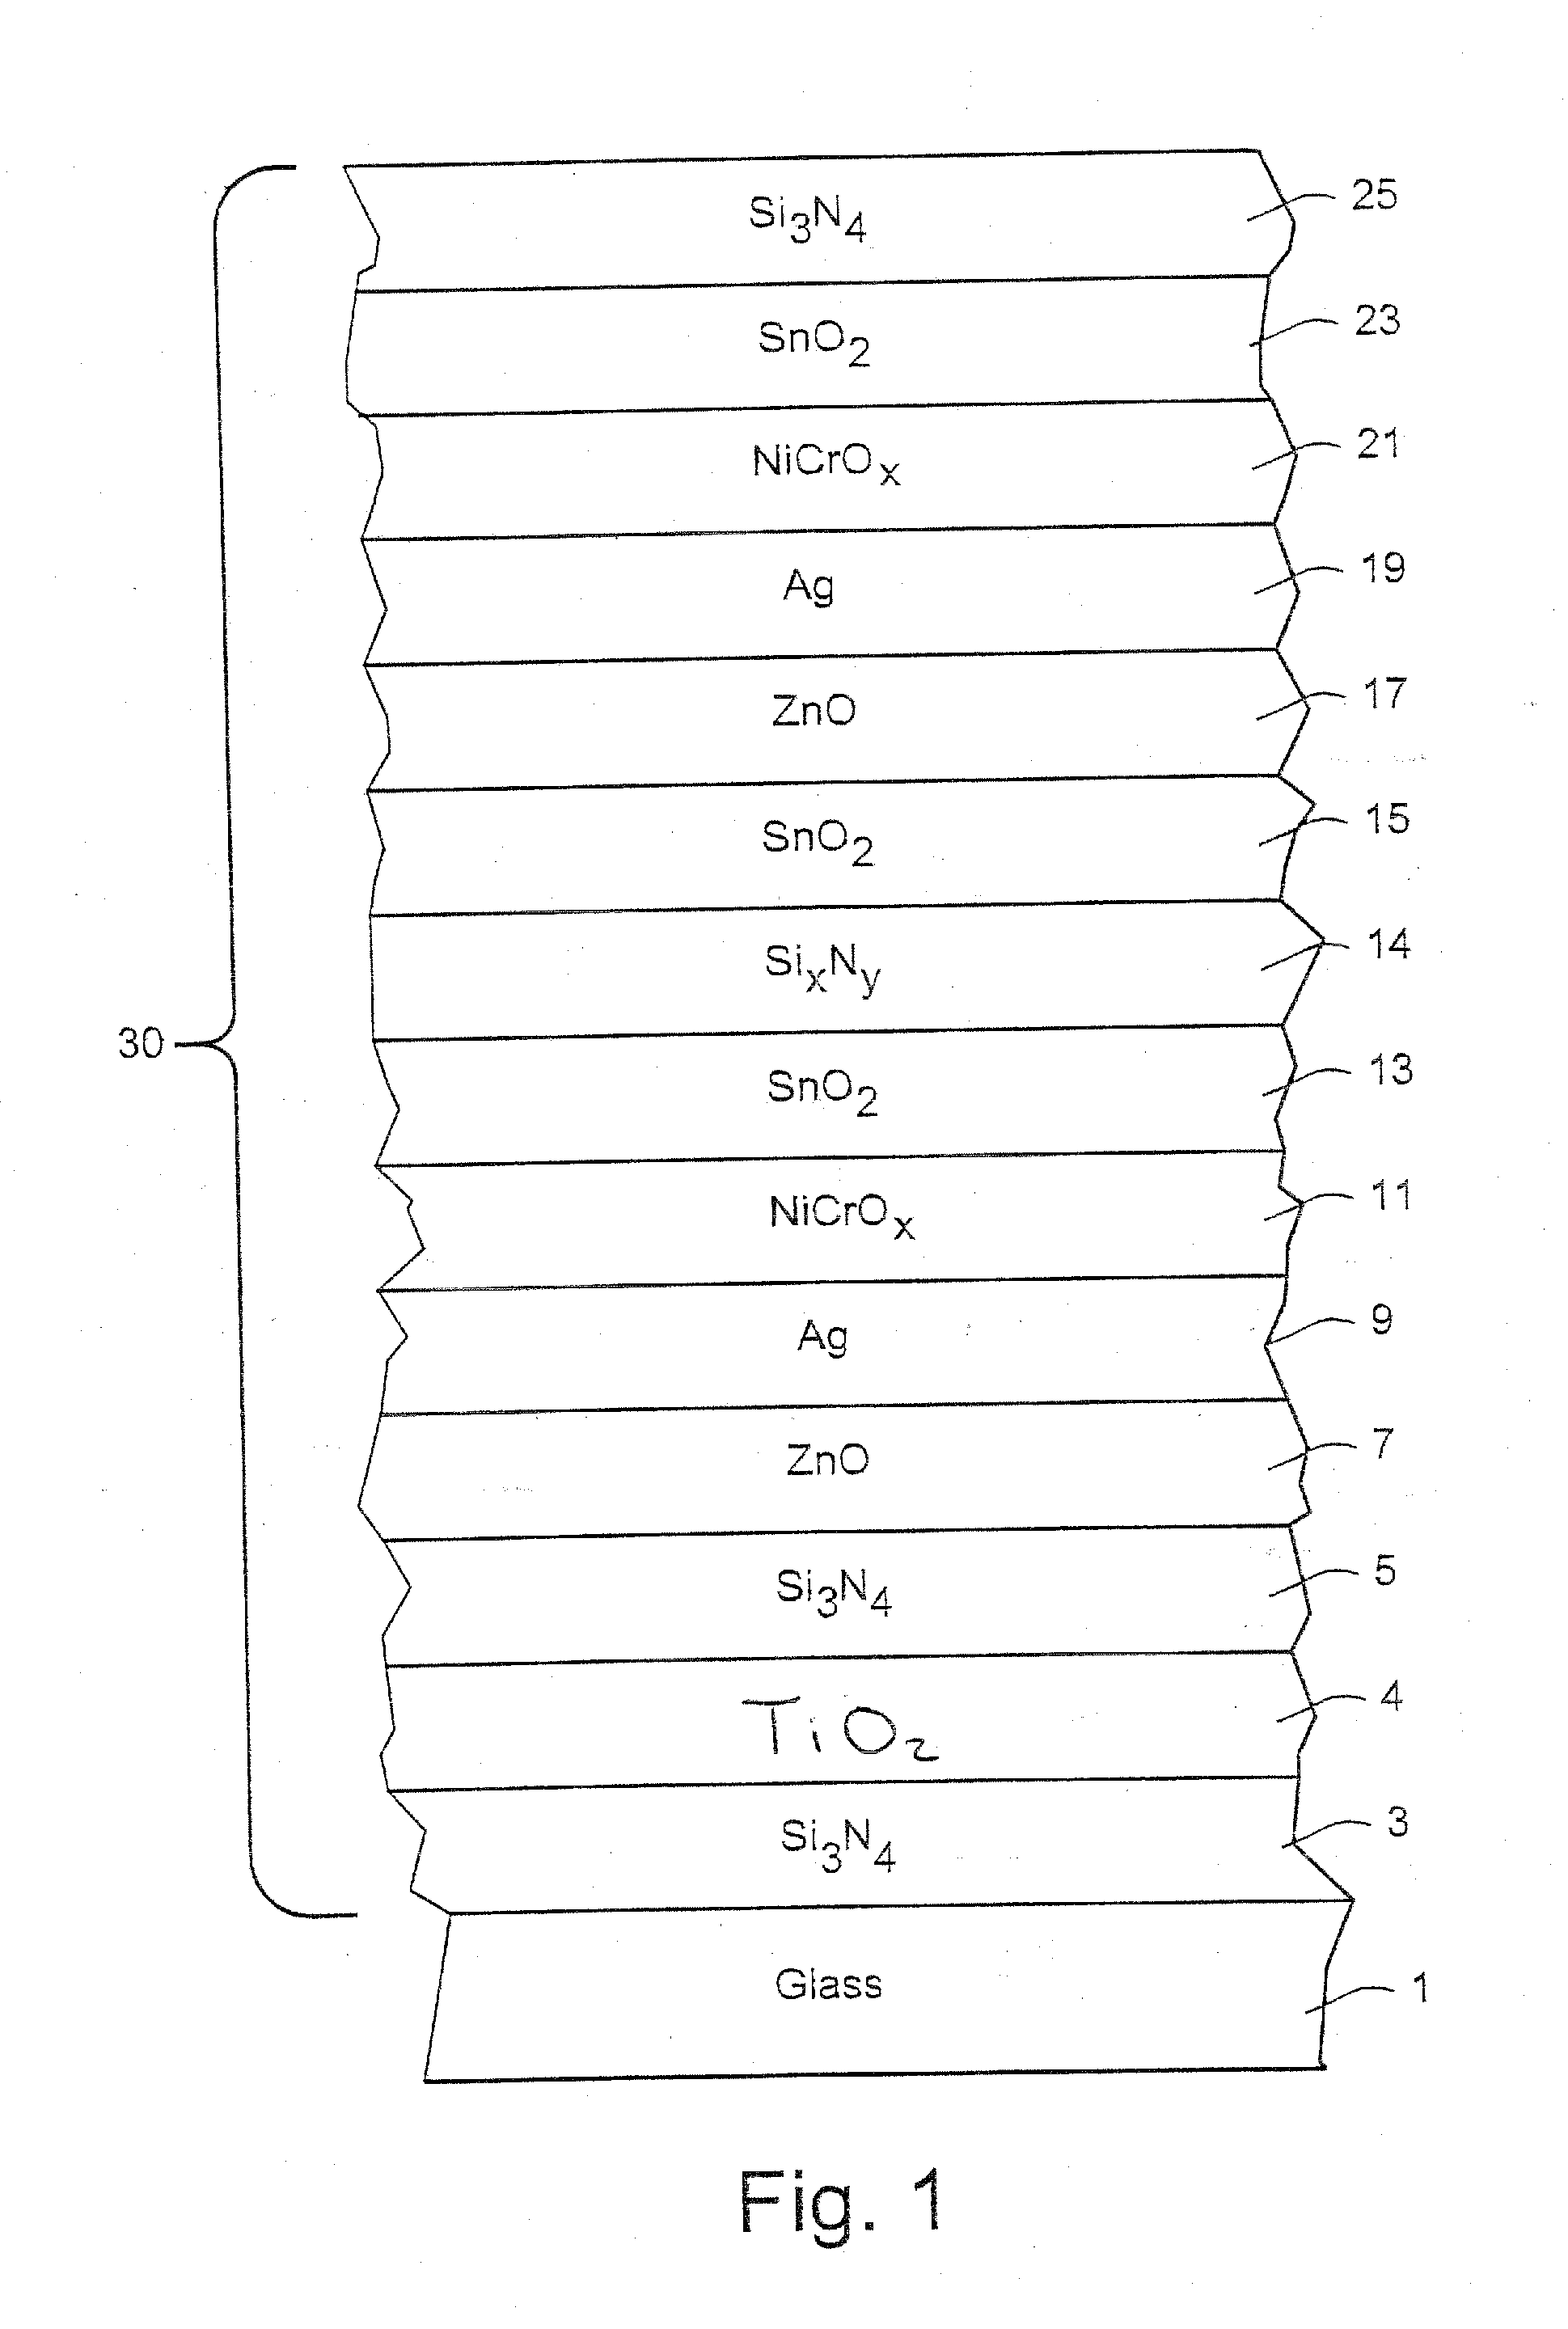 Coated article with low-e coating having titanium oxide layer and/or nicr based layer(s) to improve color values and/or transmission, and method of making same